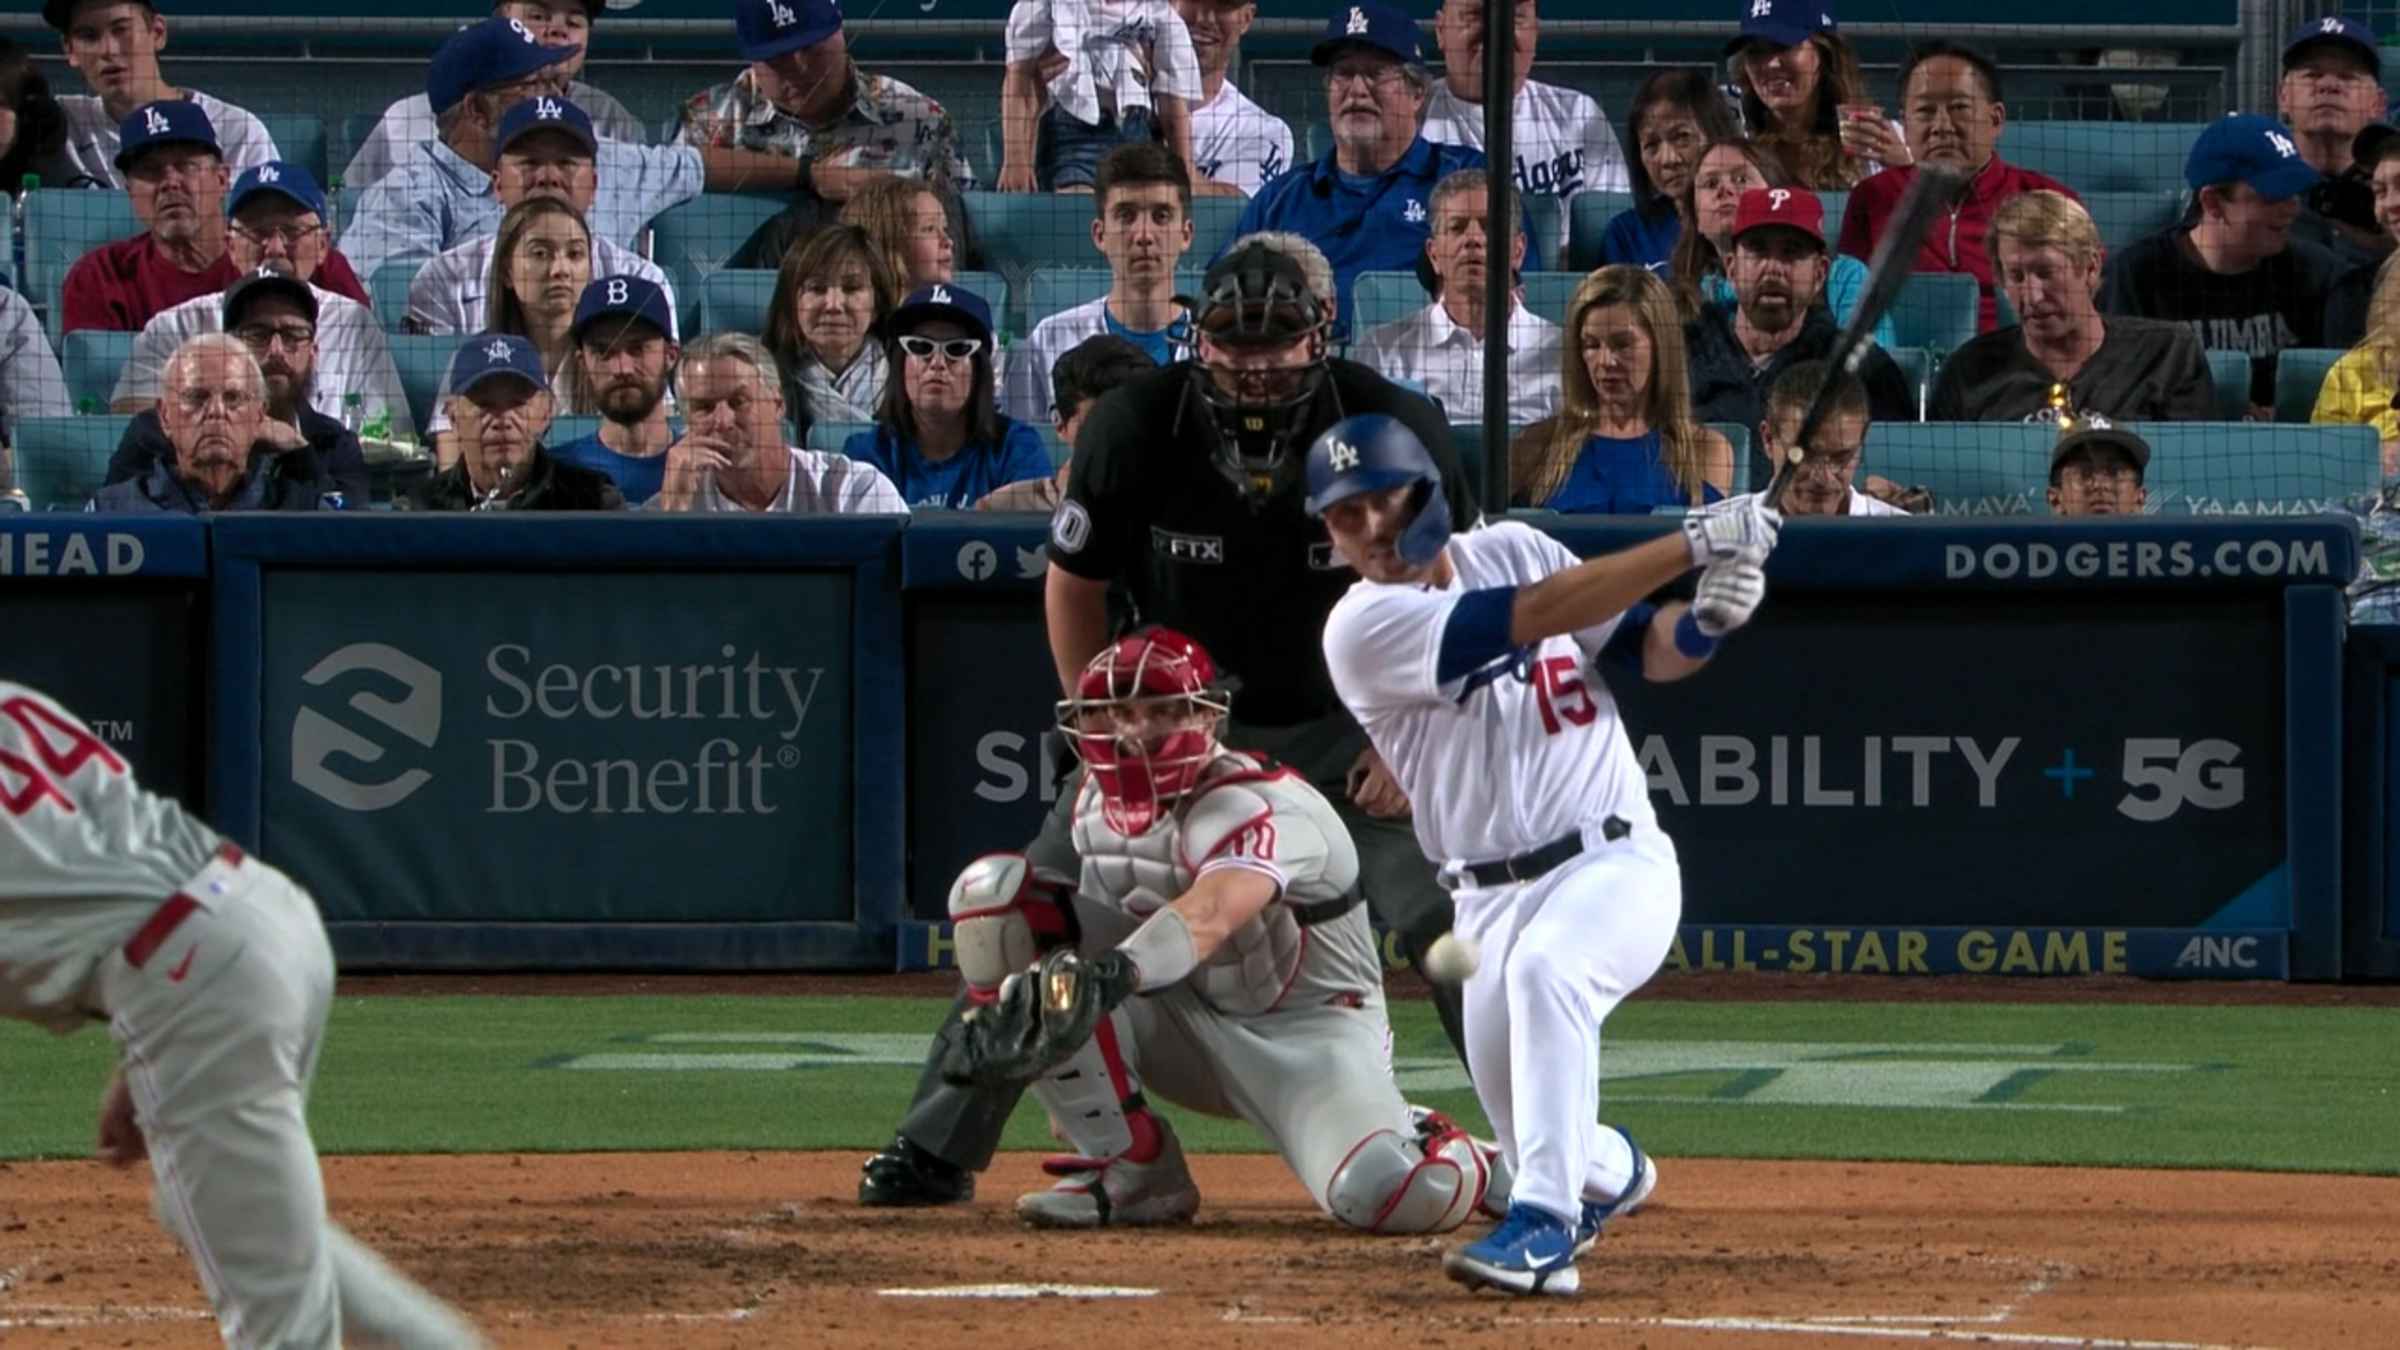 Look at Austin Barnes Receiving Technique  I have been watching more and  more of Austin Barnes receiving. I really like the subtle moves he makes to  move the ball. I am